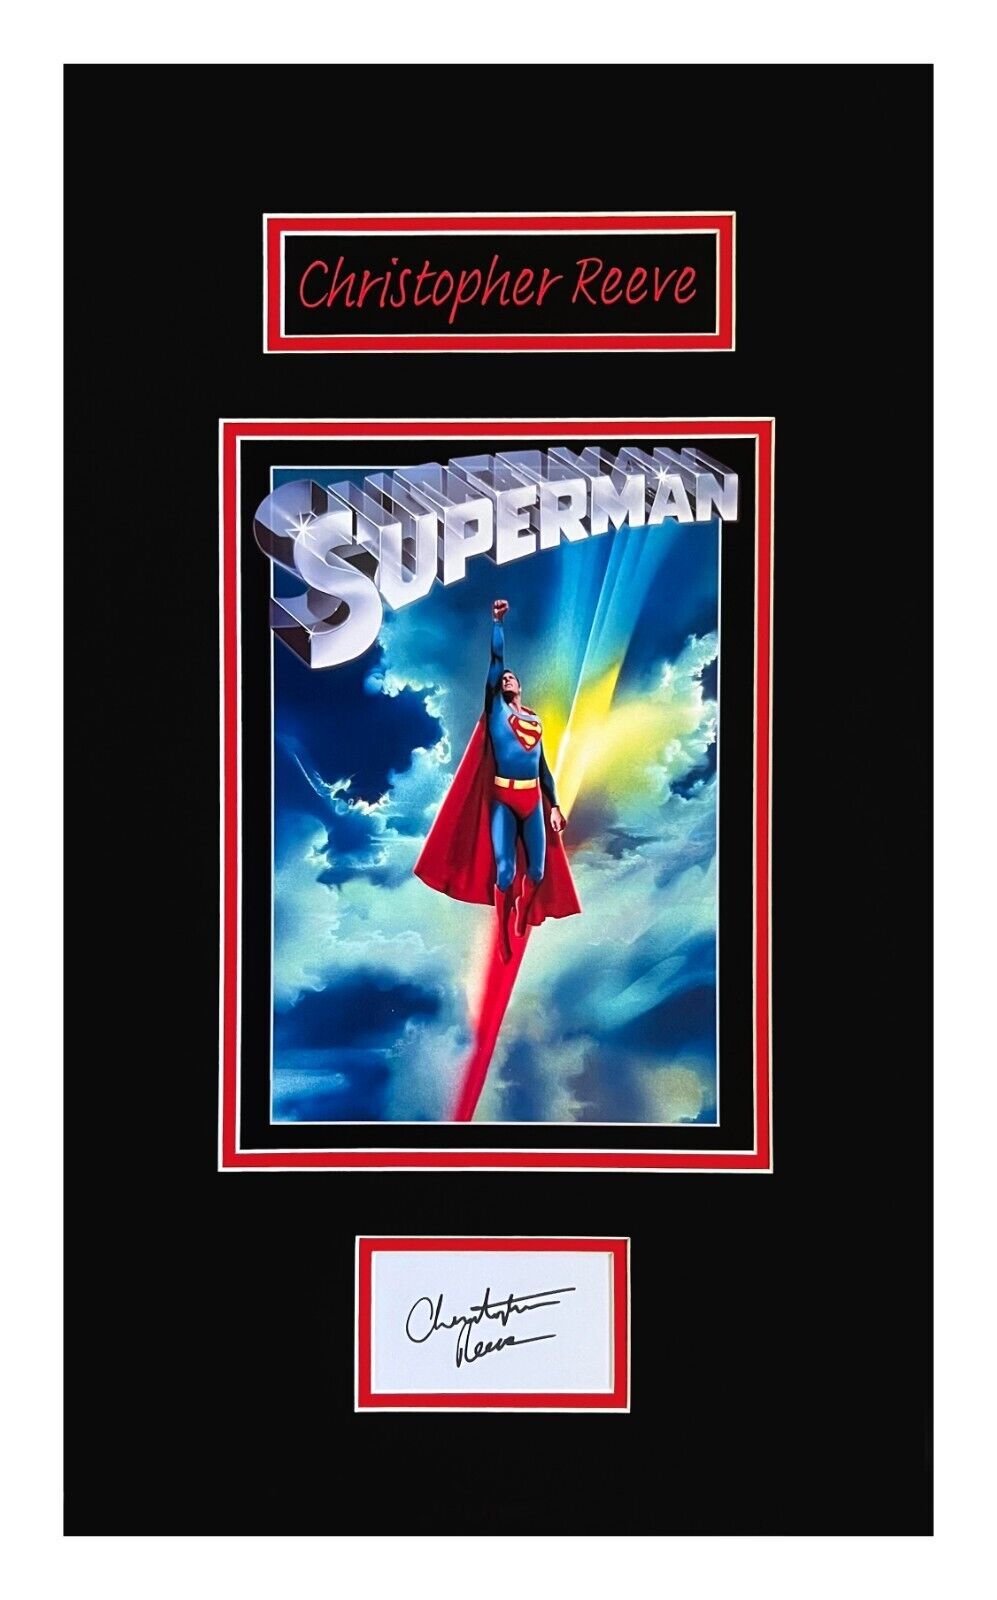 Primary image for Christopher Reeve Original Autograph Museum Framed Ready to Display